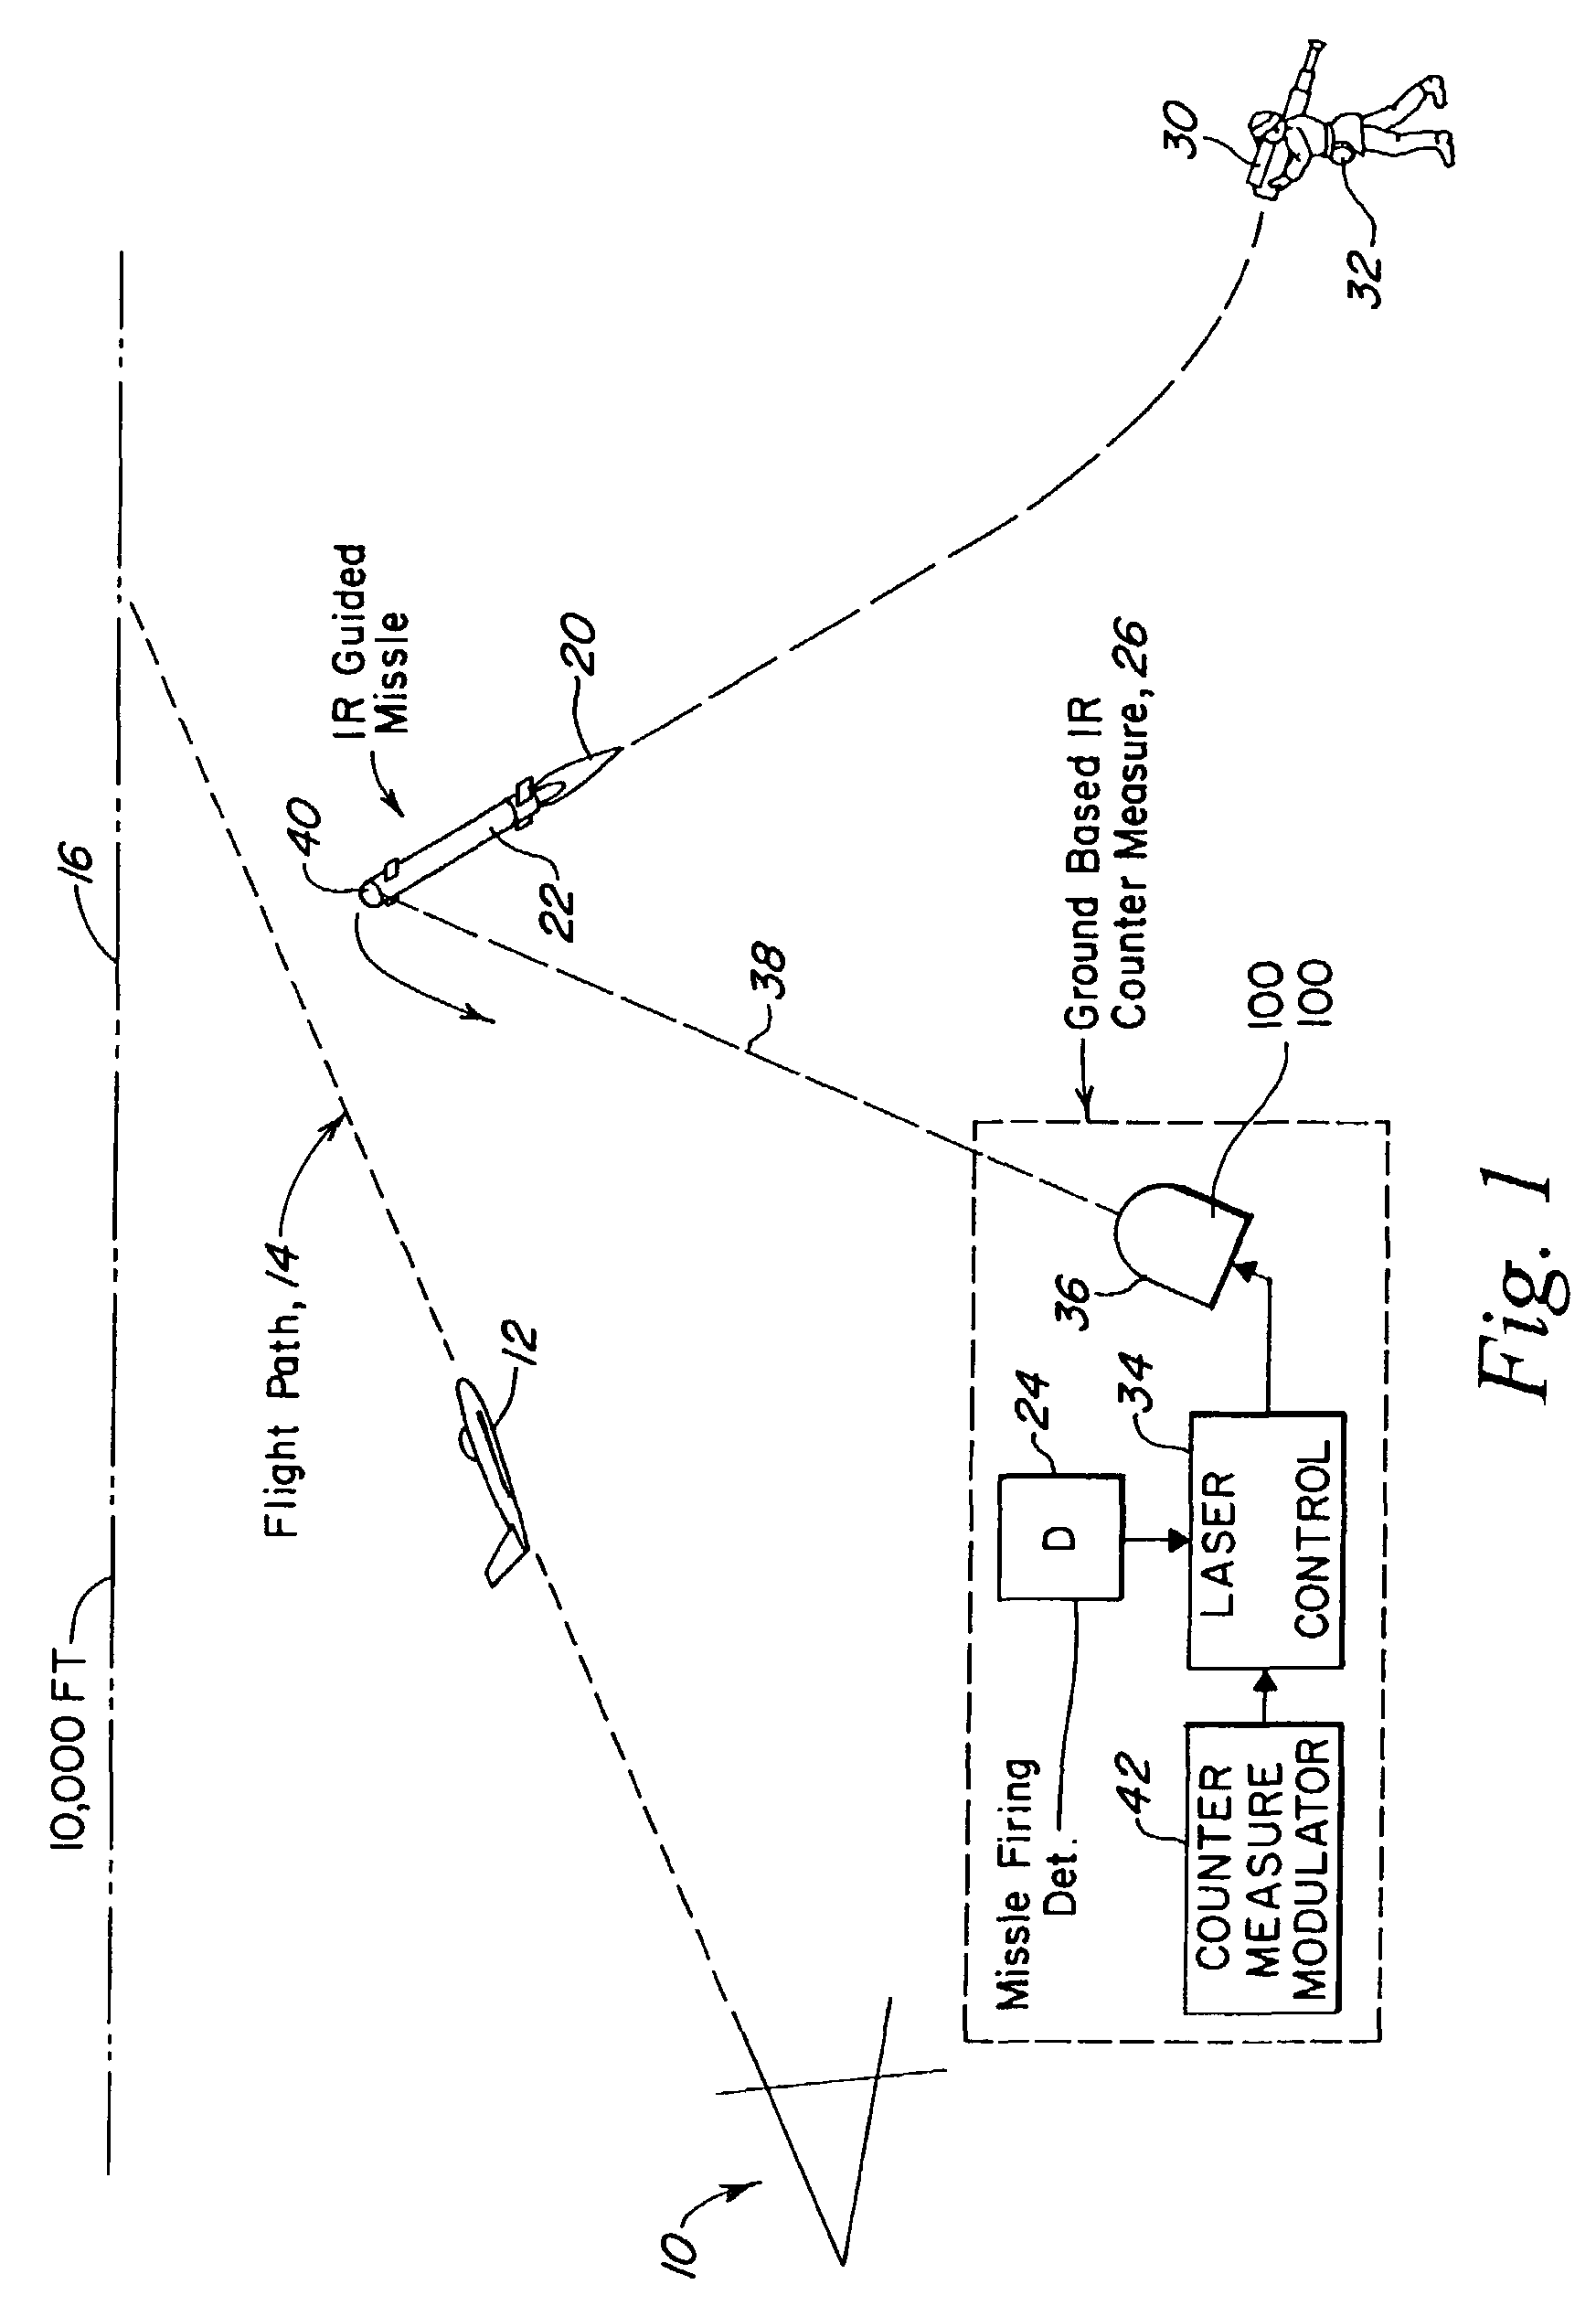 Back illumination method for counter measuring IR guided missiles